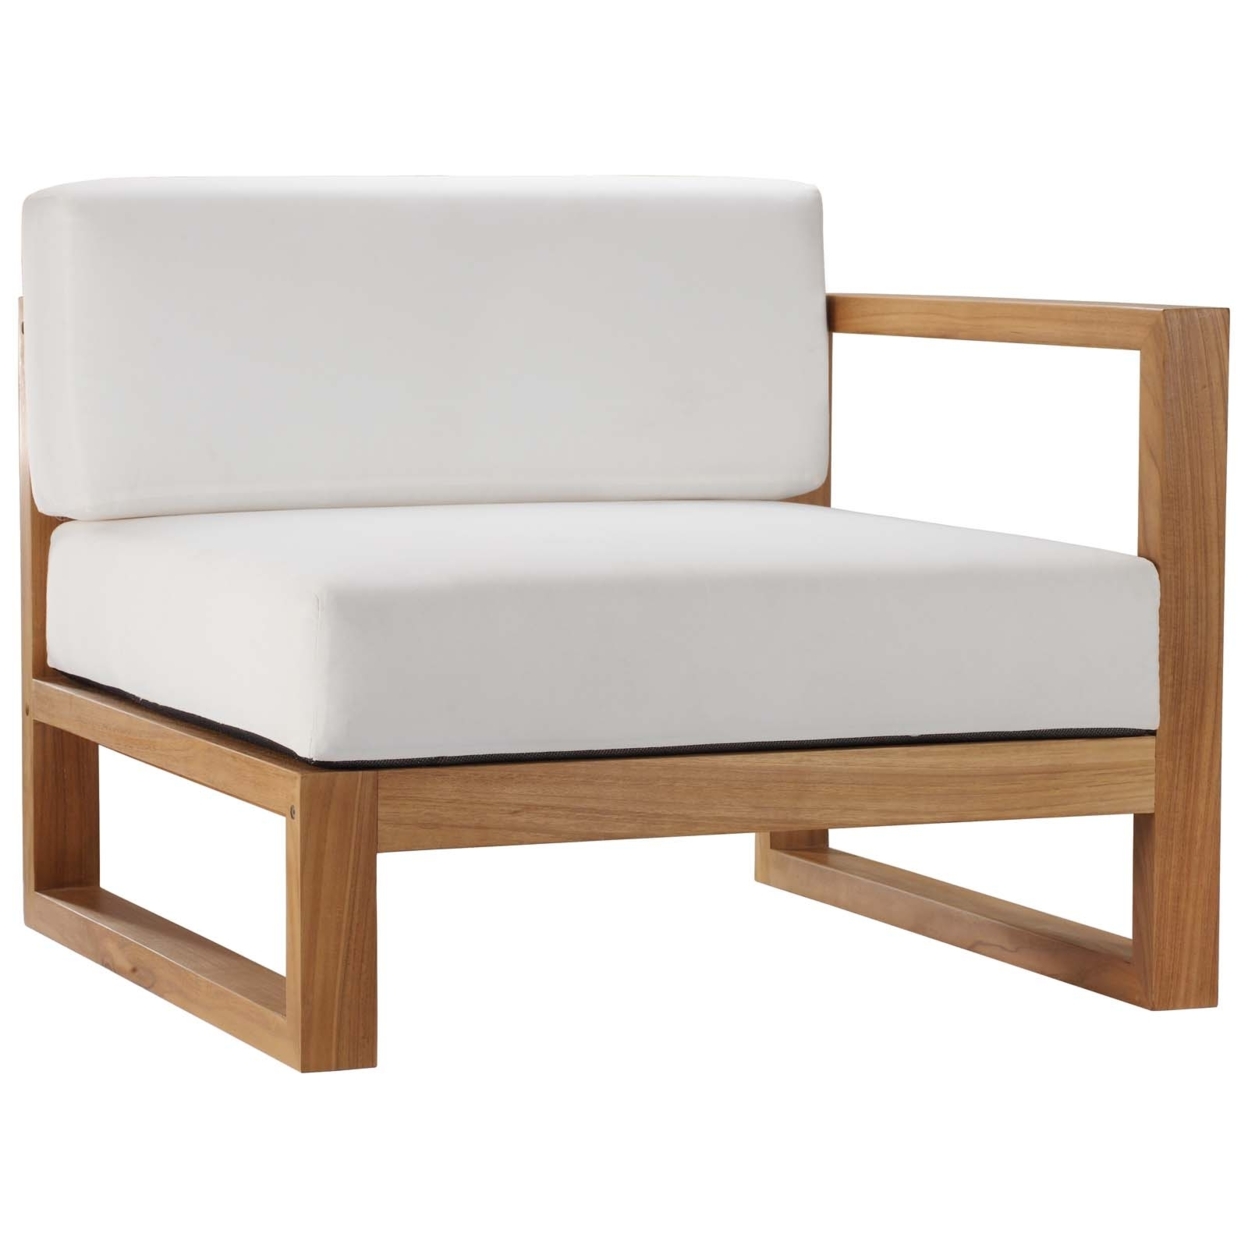 Upland Outdoor Patio Teak Wood 2-Piece Sectional Sofa Loveseat, Natural White